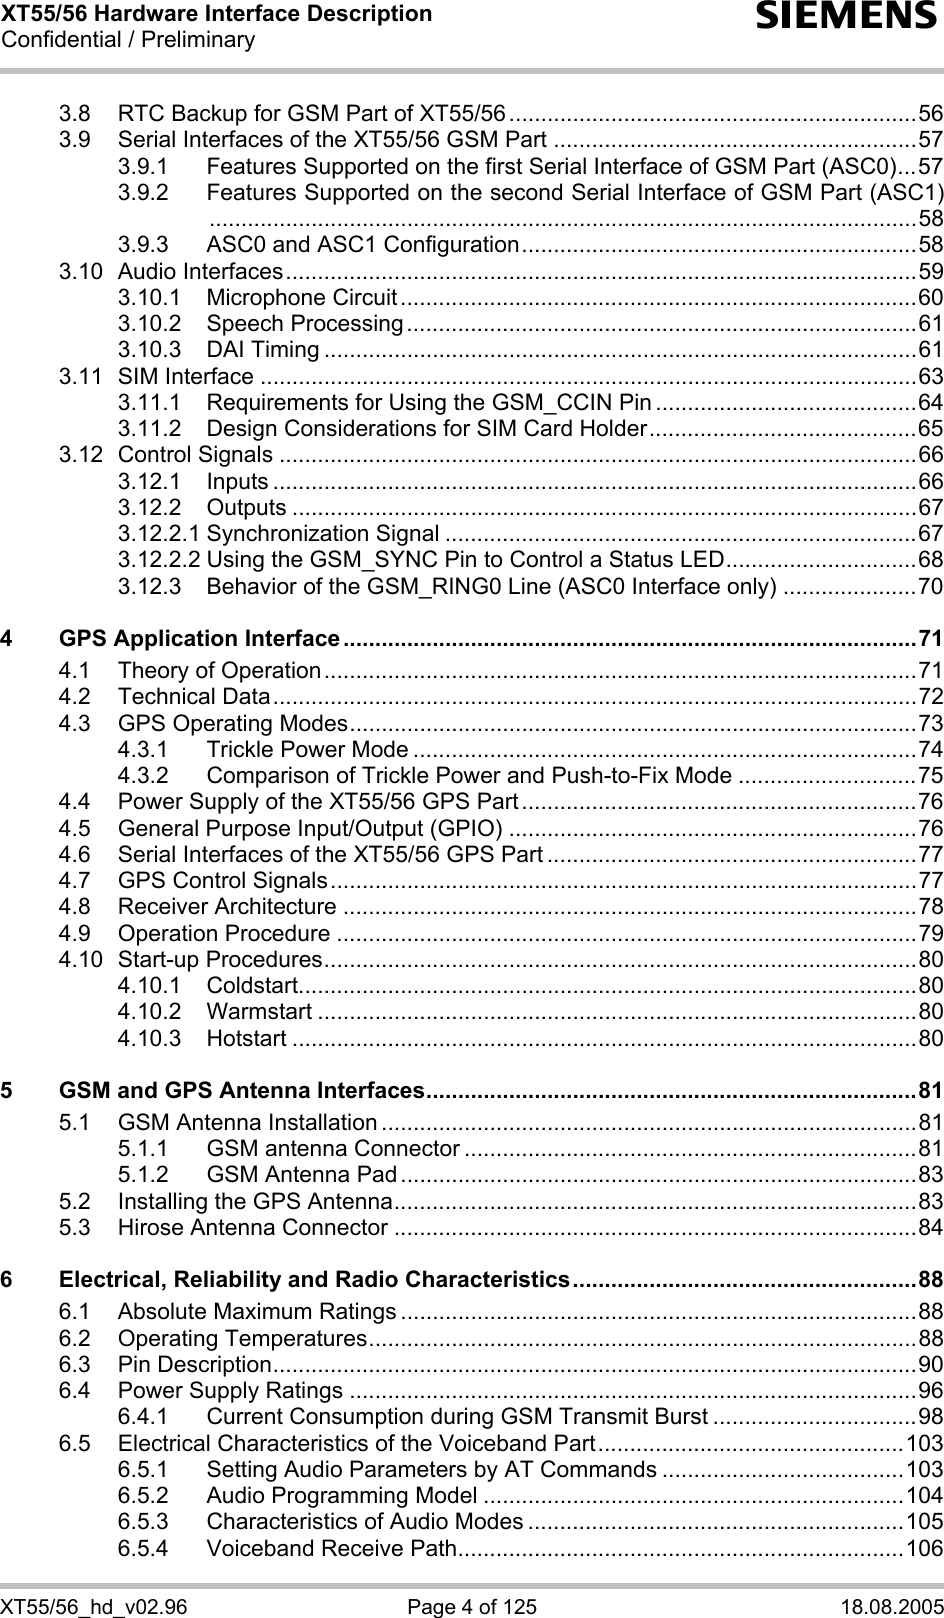 XT55/56 Hardware Interface Description Confidential / Preliminary s XT55/56_hd_v02.96  Page 4 of 125  18.08.2005 3.8 RTC Backup for GSM Part of XT55/56................................................................56 3.9 Serial Interfaces of the XT55/56 GSM Part .........................................................57 3.9.1 Features Supported on the first Serial Interface of GSM Part (ASC0)...57 3.9.2 Features Supported on the second Serial Interface of GSM Part (ASC1)...............................................................................................................58 3.9.3 ASC0 and ASC1 Configuration..............................................................58 3.10 Audio Interfaces...................................................................................................59 3.10.1 Microphone Circuit.................................................................................60 3.10.2 Speech Processing................................................................................61 3.10.3 DAI Timing .............................................................................................61 3.11 SIM Interface .......................................................................................................63 3.11.1 Requirements for Using the GSM_CCIN Pin .........................................64 3.11.2 Design Considerations for SIM Card Holder..........................................65 3.12 Control Signals ....................................................................................................66 3.12.1 Inputs .....................................................................................................66 3.12.2 Outputs ..................................................................................................67 3.12.2.1 Synchronization Signal ..........................................................................67 3.12.2.2 Using the GSM_SYNC Pin to Control a Status LED..............................68 3.12.3 Behavior of the GSM_RING0 Line (ASC0 Interface only) .....................70 4 GPS Application Interface ..........................................................................................71 4.1 Theory of Operation.............................................................................................71 4.2 Technical Data.....................................................................................................72 4.3 GPS Operating Modes.........................................................................................73 4.3.1 Trickle Power Mode ...............................................................................74 4.3.2 Comparison of Trickle Power and Push-to-Fix Mode ............................75 4.4 Power Supply of the XT55/56 GPS Part..............................................................76 4.5 General Purpose Input/Output (GPIO) ................................................................76 4.6 Serial Interfaces of the XT55/56 GPS Part ..........................................................77 4.7 GPS Control Signals............................................................................................77 4.8 Receiver Architecture ..........................................................................................78 4.9 Operation Procedure ...........................................................................................79 4.10 Start-up Procedures.............................................................................................80 4.10.1 Coldstart.................................................................................................80 4.10.2 Warmstart ..............................................................................................80 4.10.3 Hotstart ..................................................................................................80 5 GSM and GPS Antenna Interfaces.............................................................................81 5.1 GSM Antenna Installation ....................................................................................81 5.1.1 GSM antenna Connector .......................................................................81 5.1.2 GSM Antenna Pad .................................................................................83 5.2 Installing the GPS Antenna..................................................................................83 5.3 Hirose Antenna Connector ..................................................................................84 6 Electrical, Reliability and Radio Characteristics......................................................88 6.1 Absolute Maximum Ratings .................................................................................88 6.2 Operating Temperatures......................................................................................88 6.3 Pin Description.....................................................................................................90 6.4 Power Supply Ratings .........................................................................................96 6.4.1 Current Consumption during GSM Transmit Burst ................................98 6.5 Electrical Characteristics of the Voiceband Part................................................103 6.5.1 Setting Audio Parameters by AT Commands ......................................103 6.5.2 Audio Programming Model ..................................................................104 6.5.3 Characteristics of Audio Modes ...........................................................105 6.5.4 Voiceband Receive Path......................................................................106 